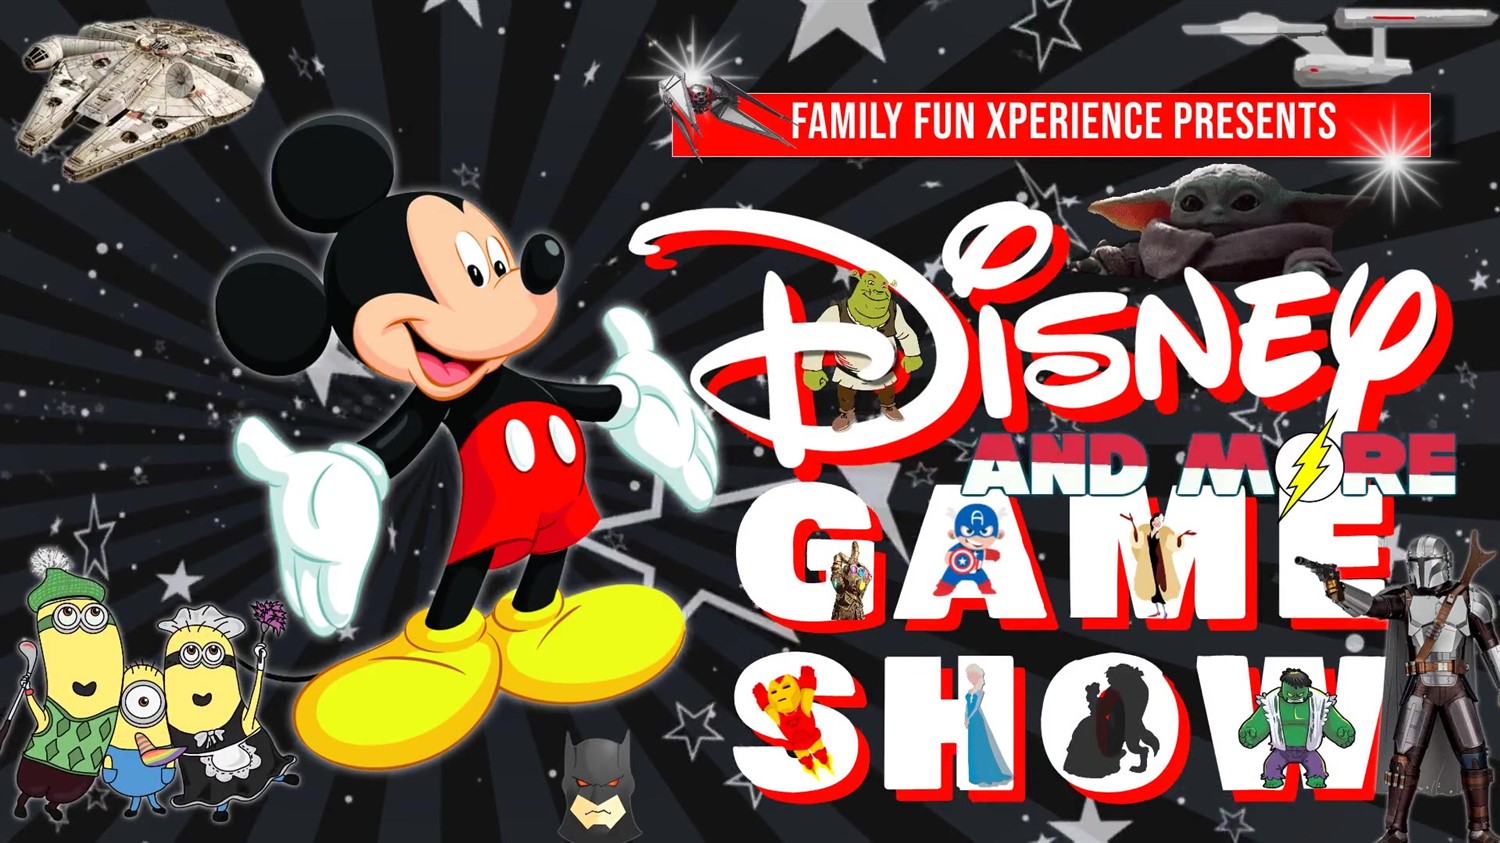 DISNEY & MORE GAME SHOW Animation, movies, sci-fi, superheroes, & much more! on sep. 06, 19:00@FFX Theatre - Pick a seat, Buy tickets and Get information on Family Fun Xperience tickets.ffxshow.org